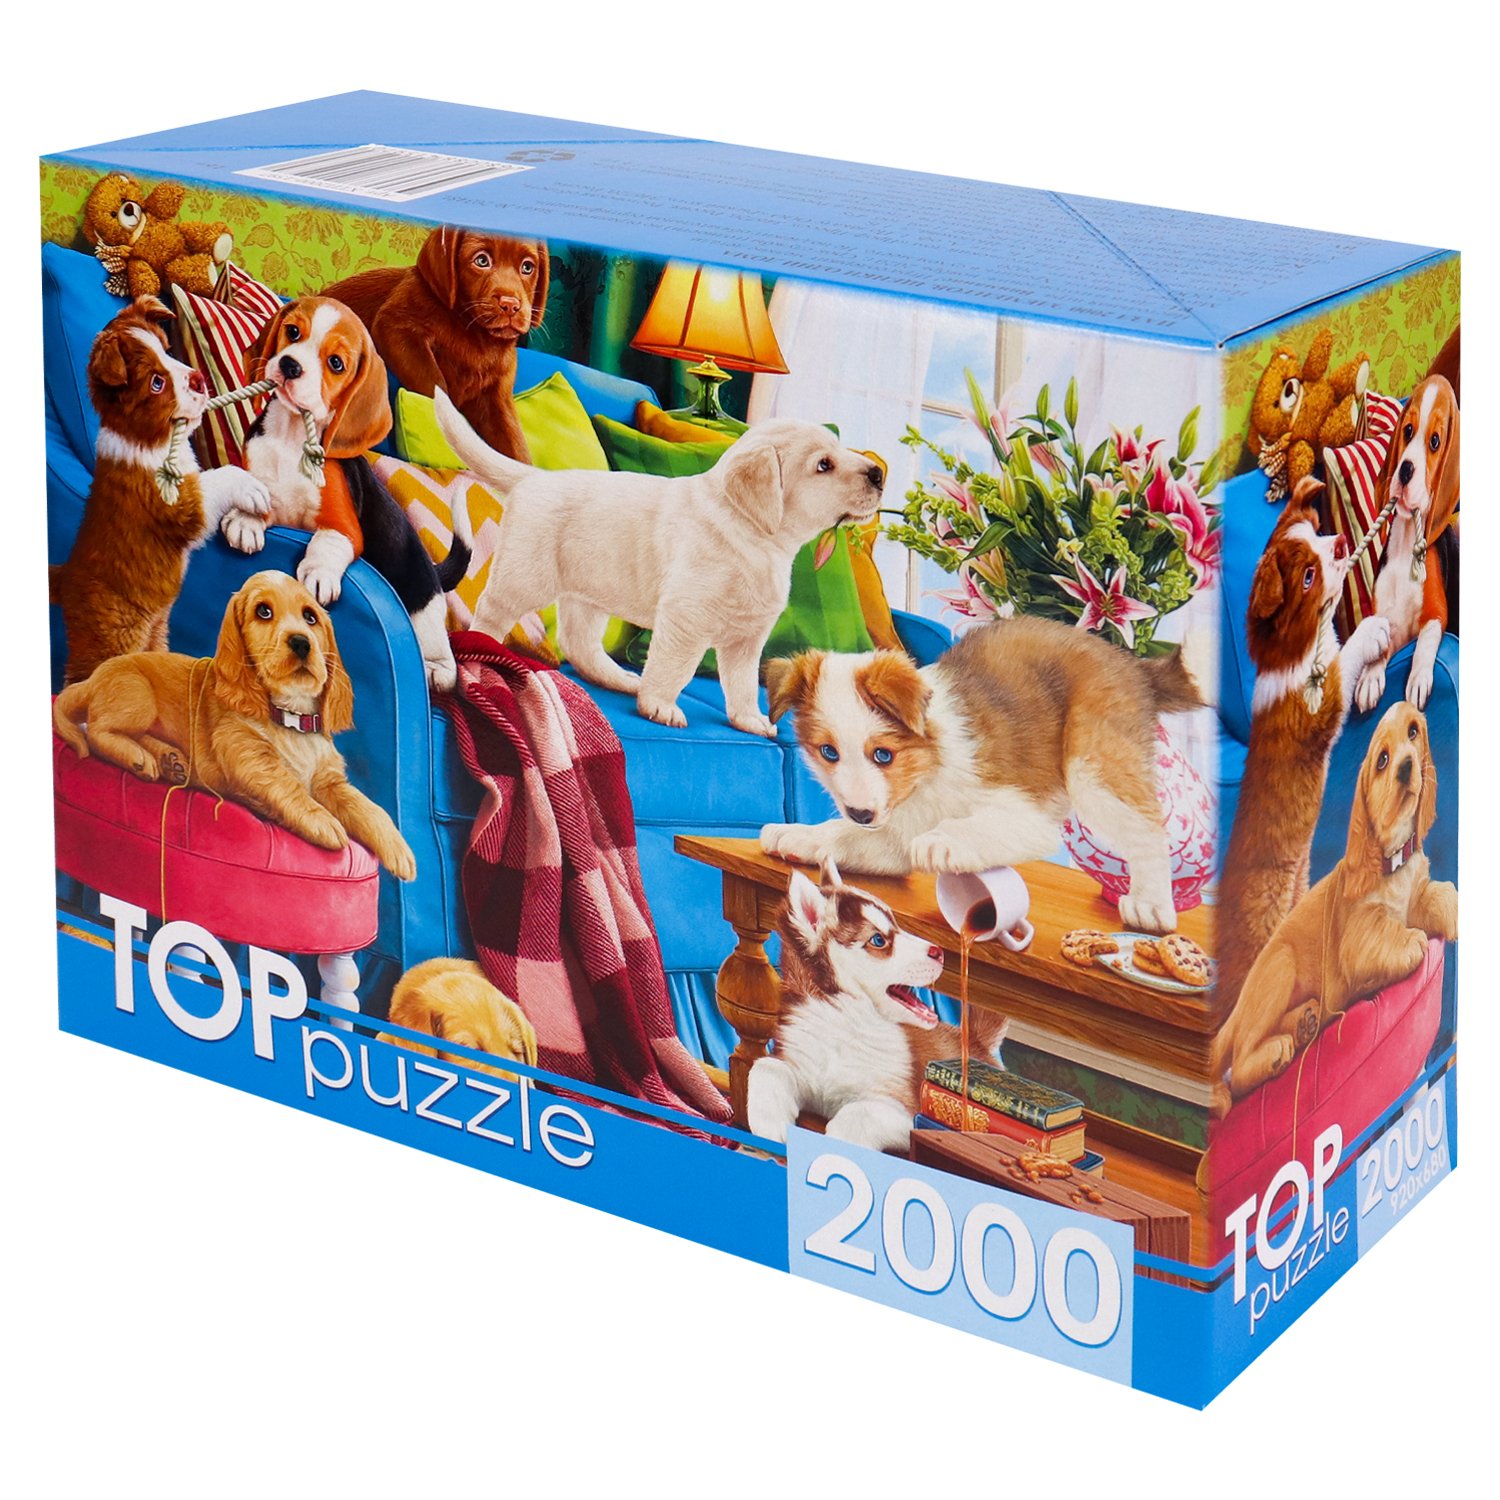  . TOPpuzzle.  2000 . .1597   